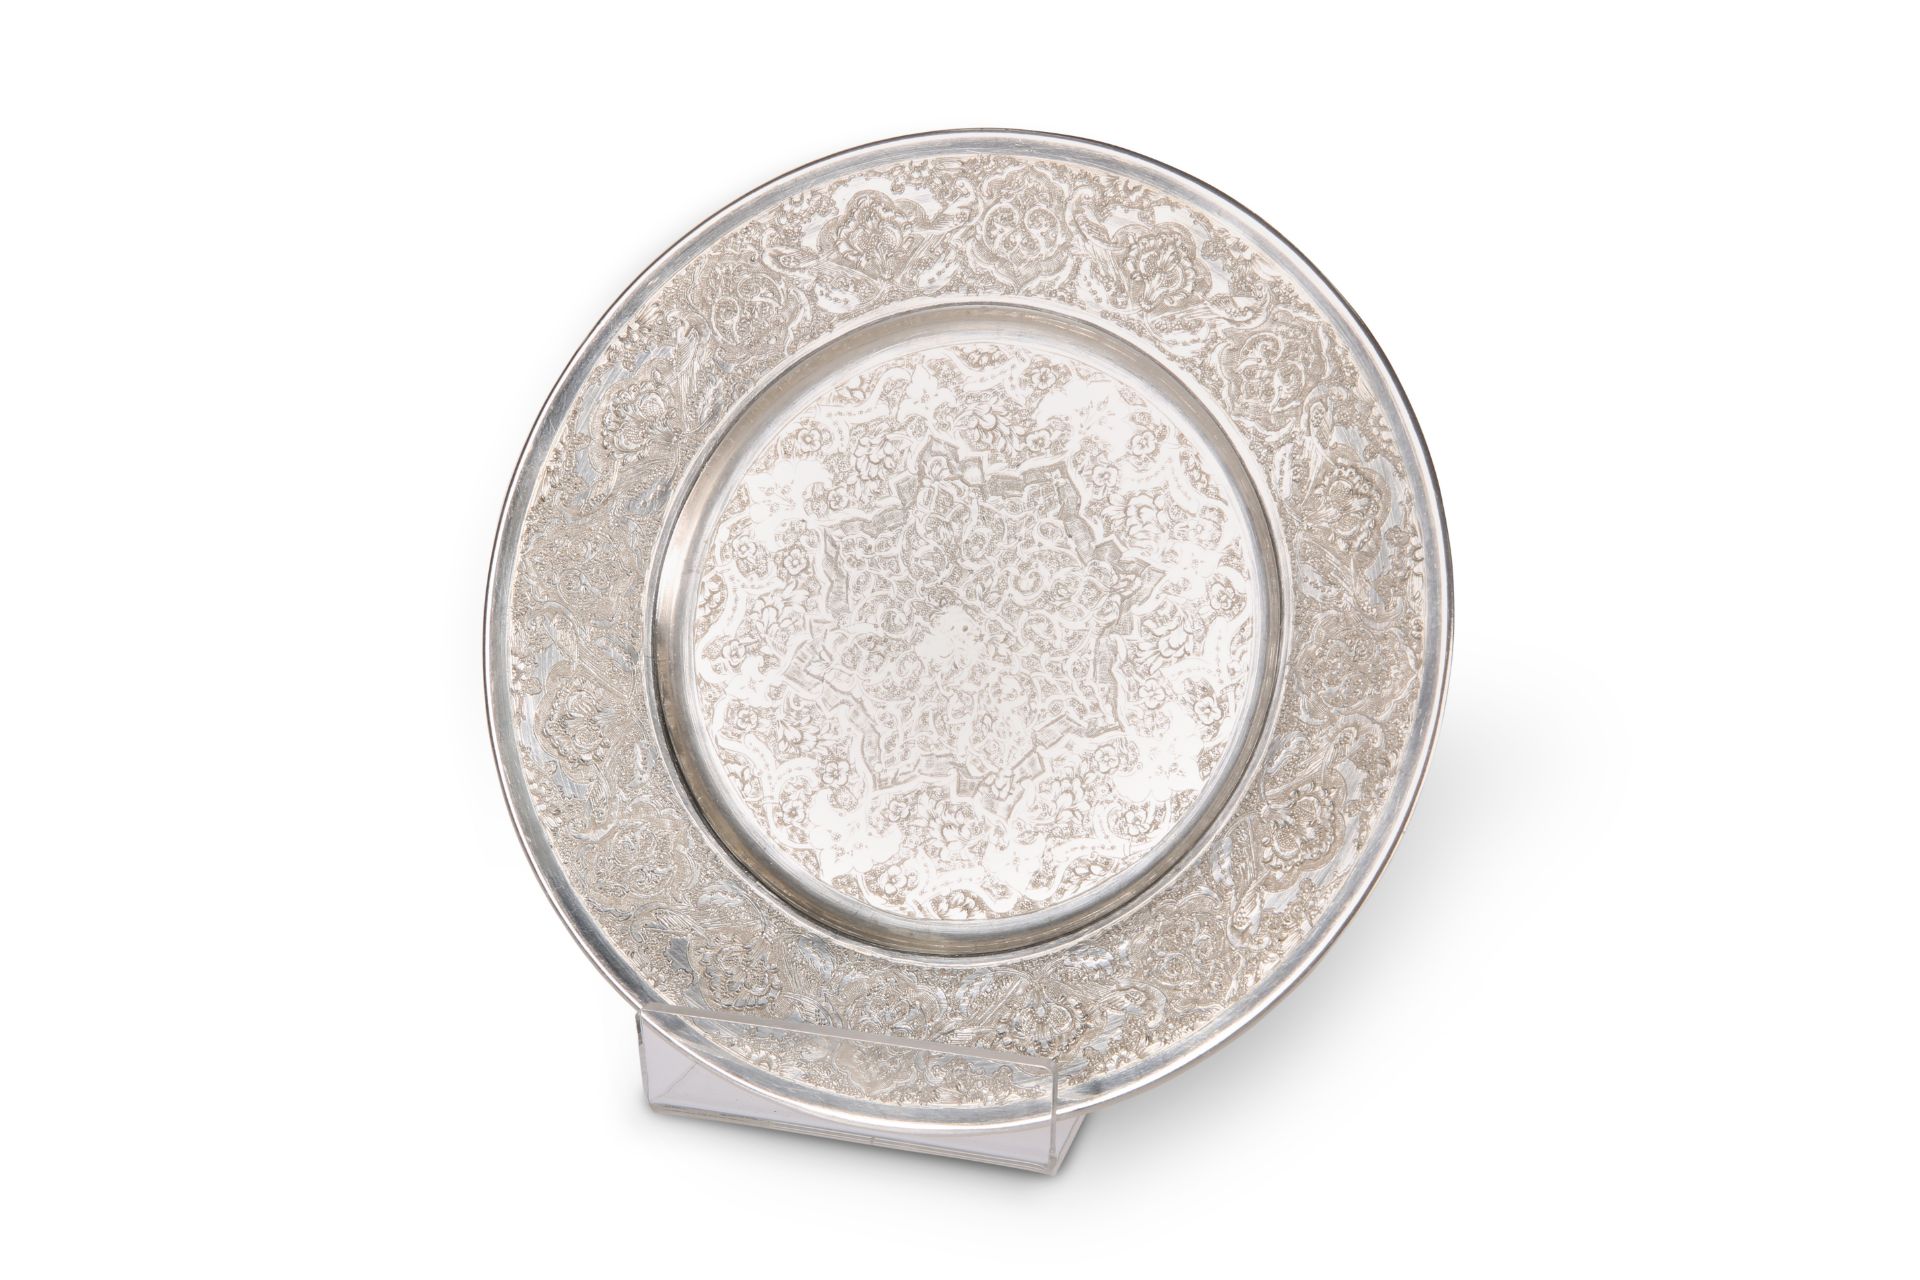 A FINELY ENGRAVED PERSIAN STERLING SILVER DISH